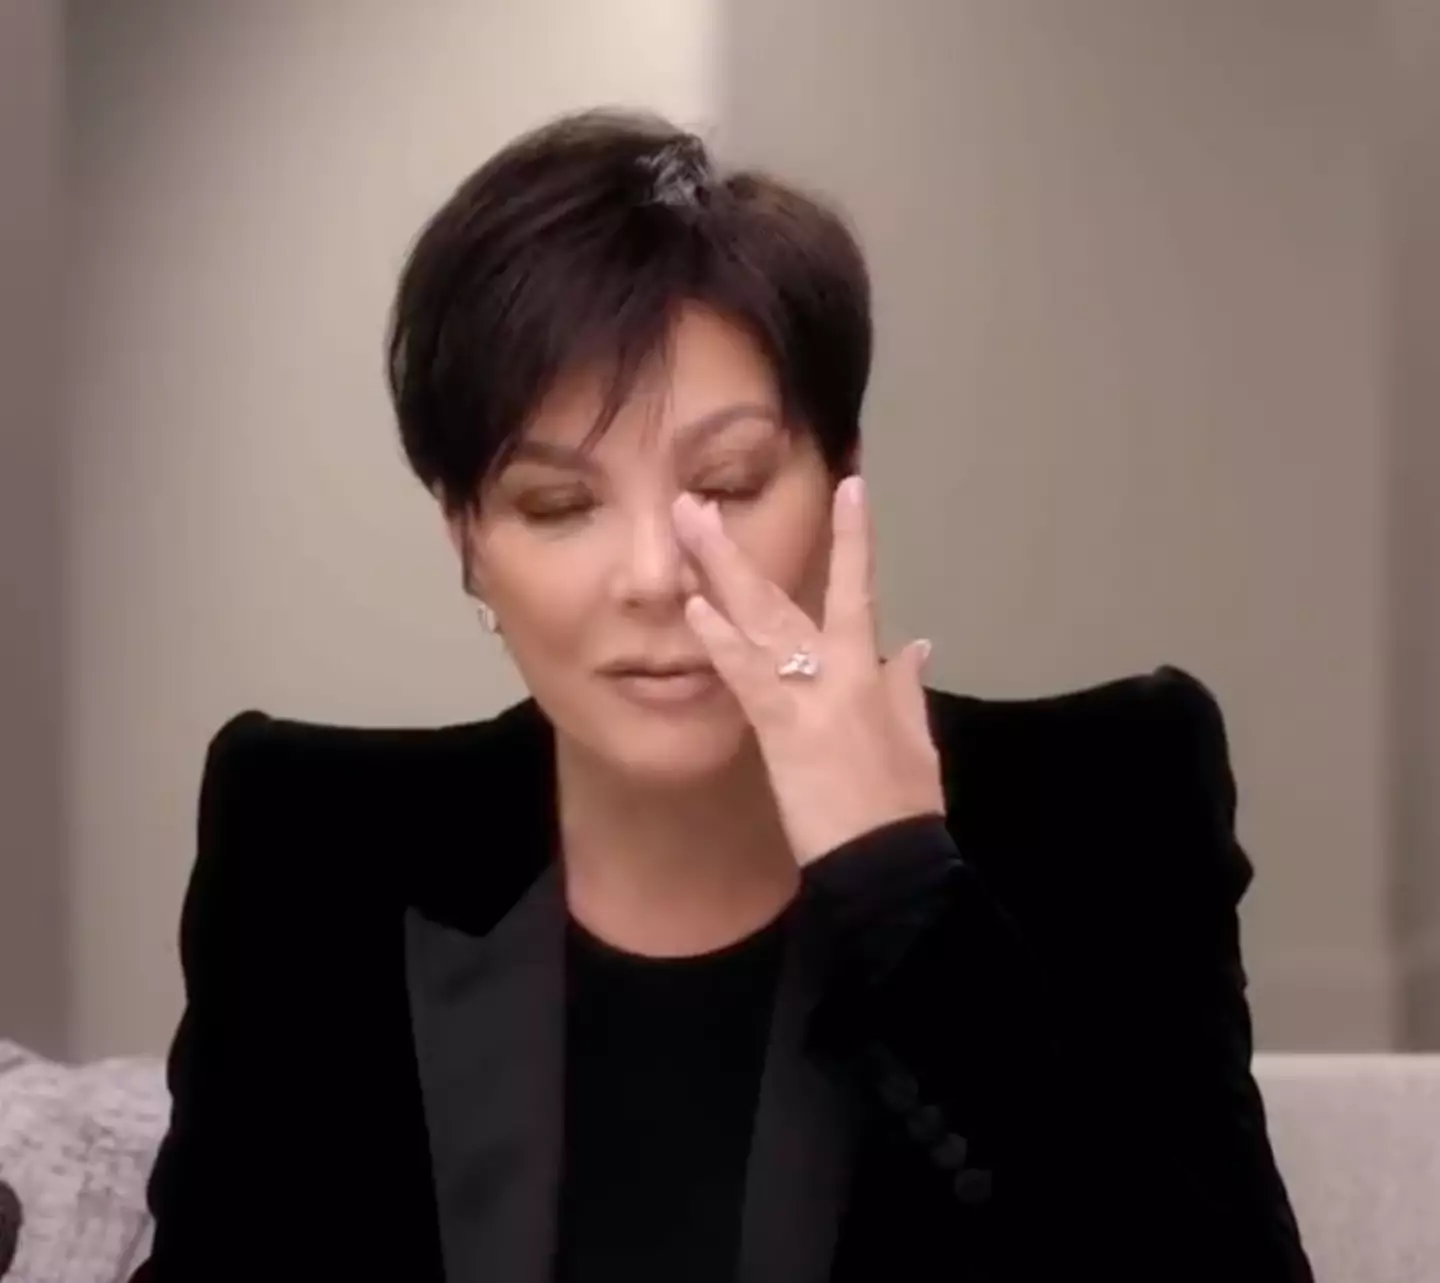 It seems momager Kris Jenner could be battling through some health issues.